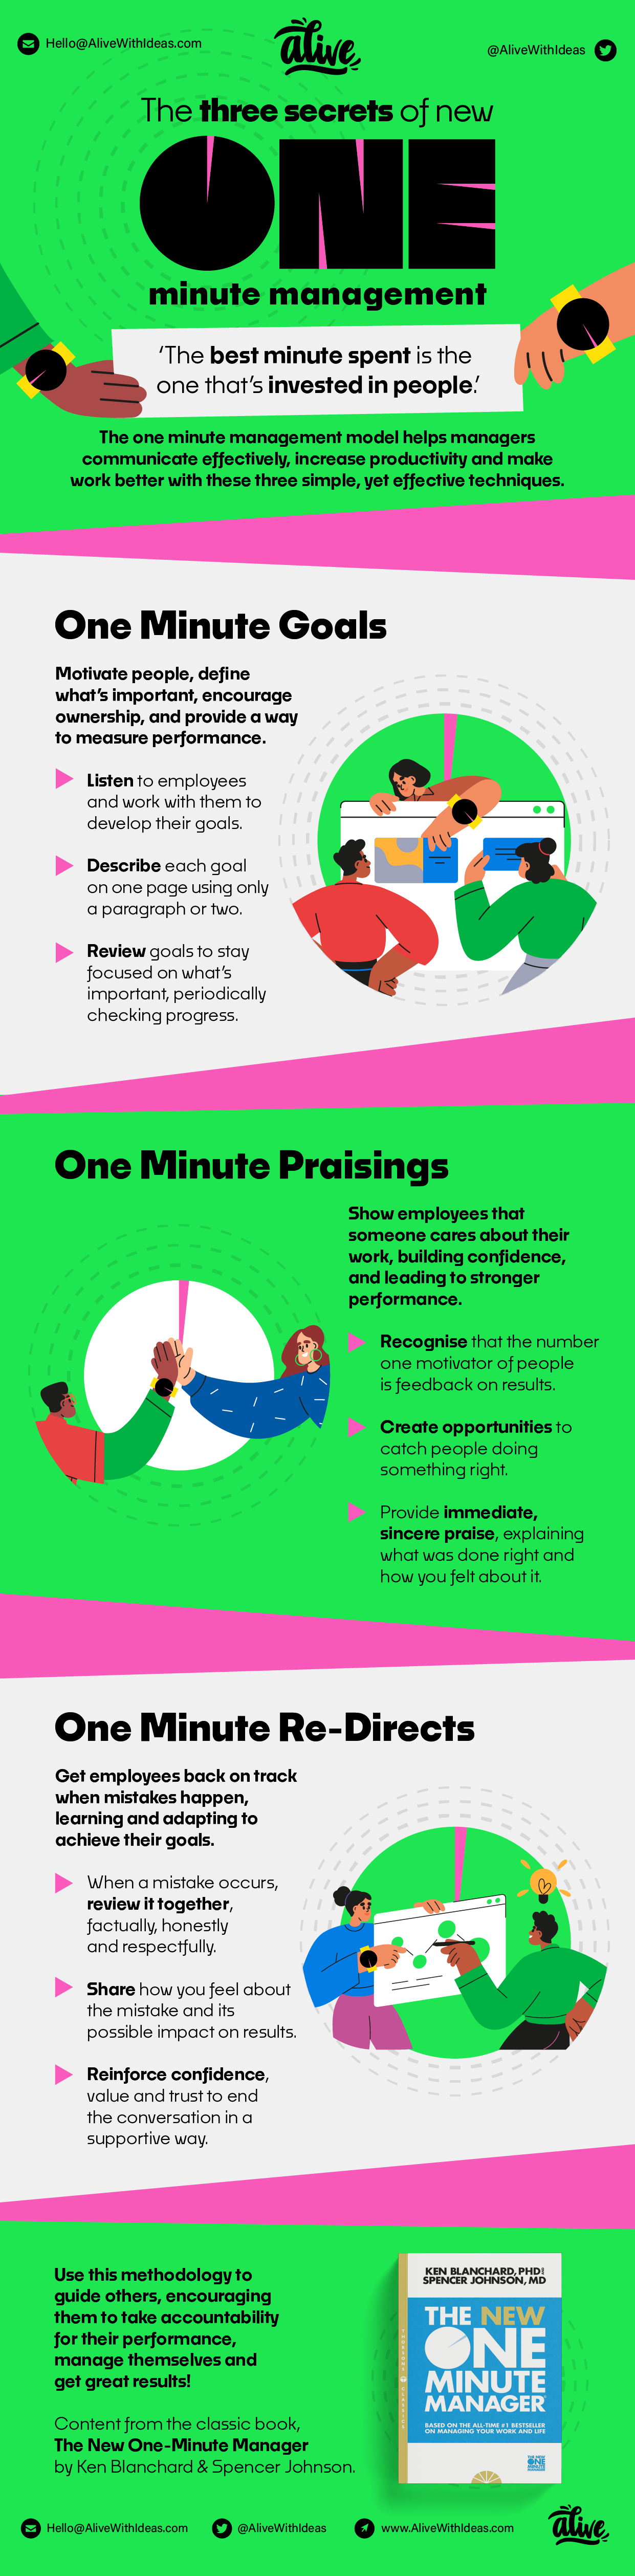 Infographic with key sections 1) one minute goals 2) one minute praising 3) one minute re-directs. Lime green background with illustrations of people and an image of the book referenced in the infographic: The New One Minute Manager by Ken Blanchard and Spencer Johnson